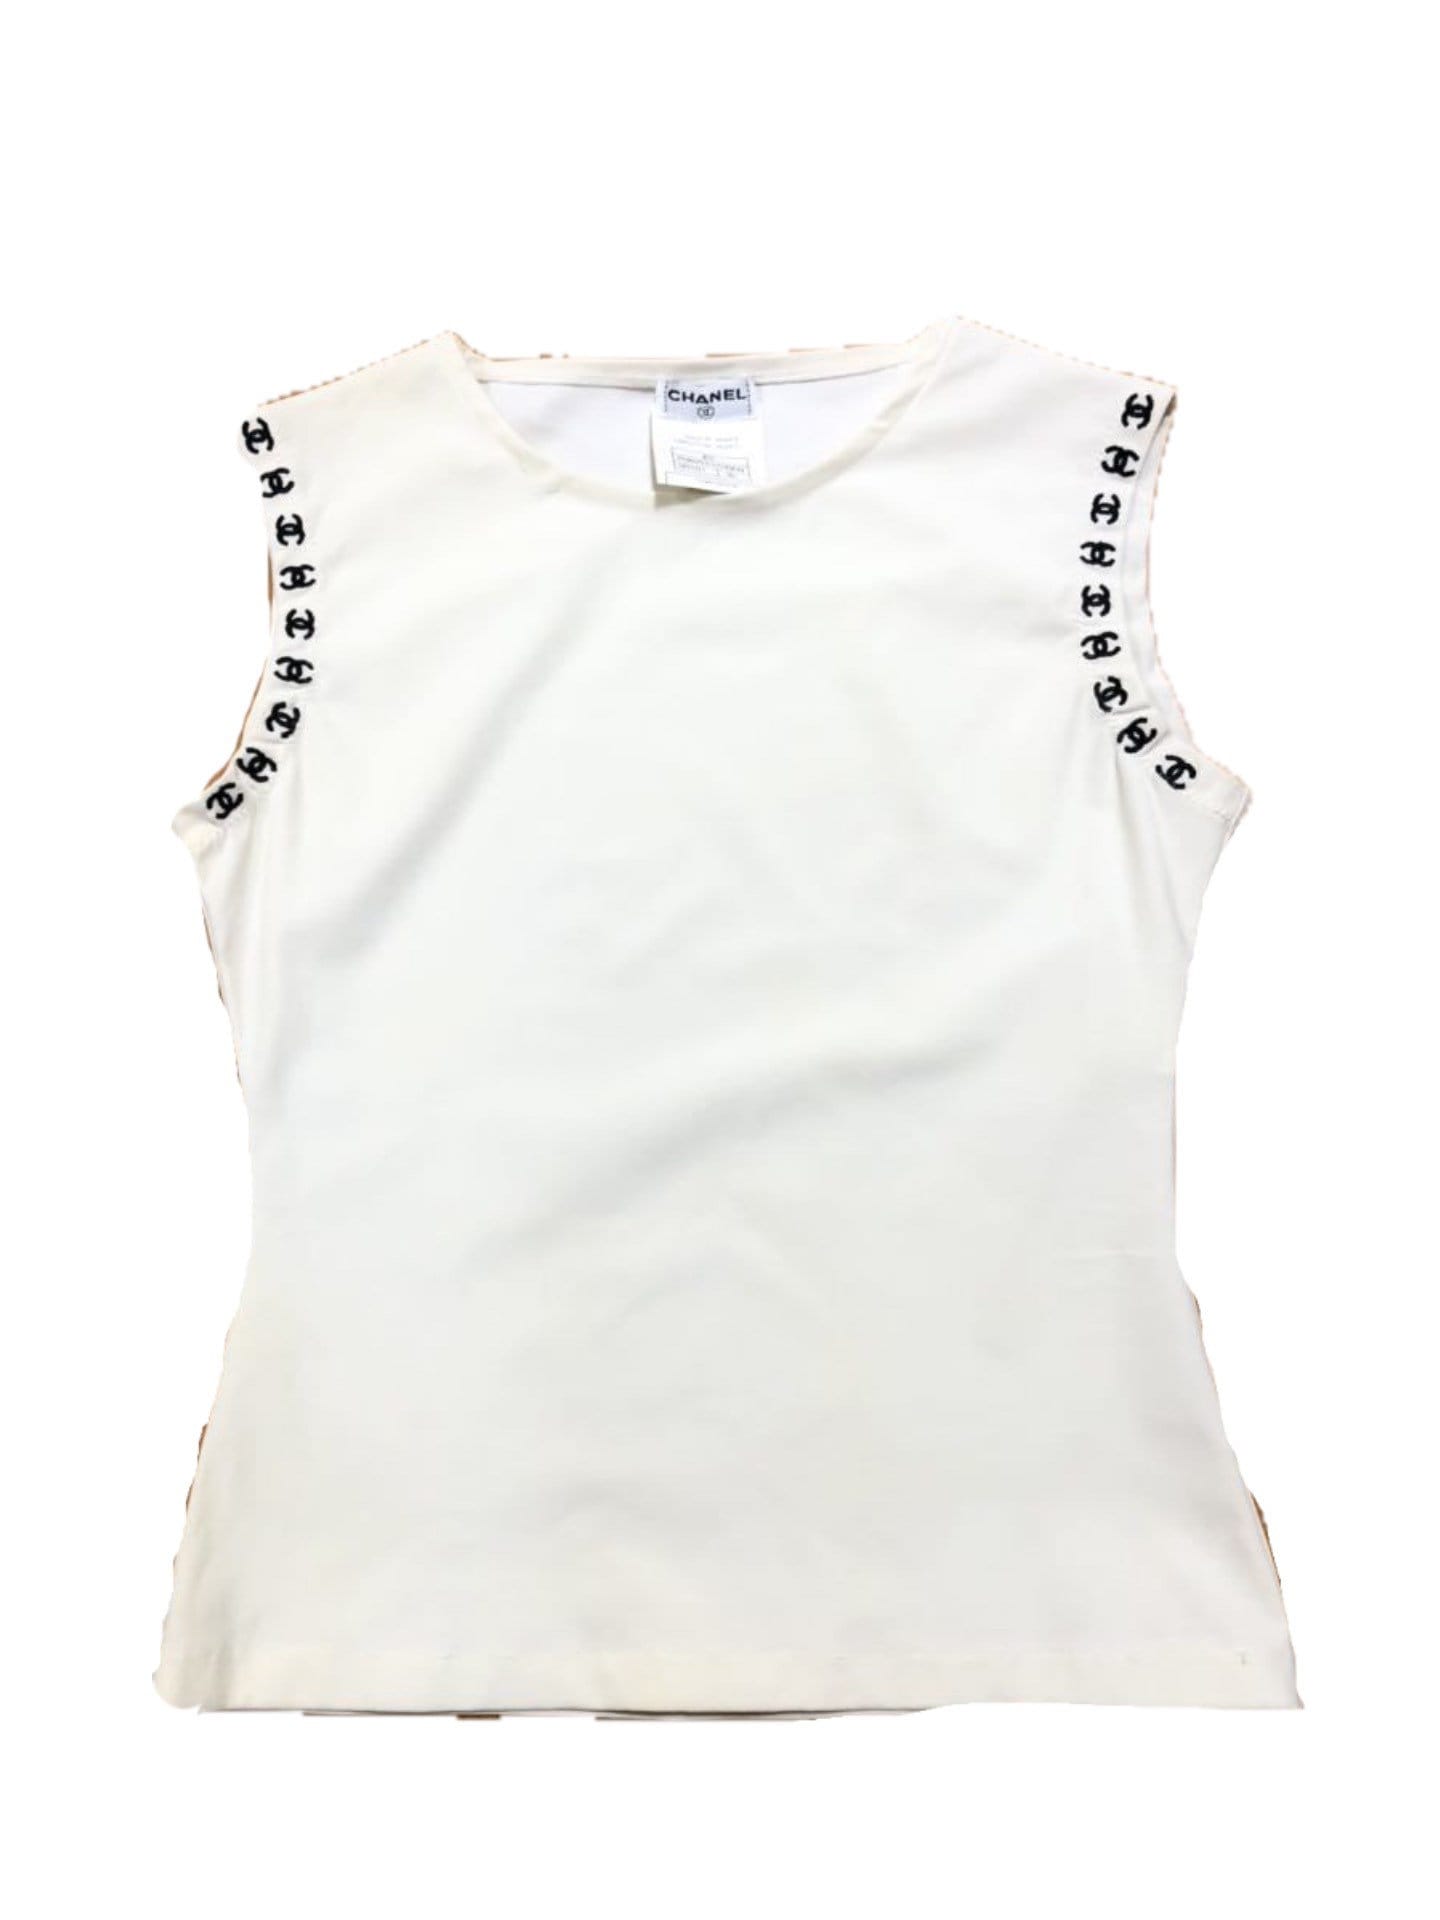 Chanel Coo Tank Top by Lucia Stewart - Pixels